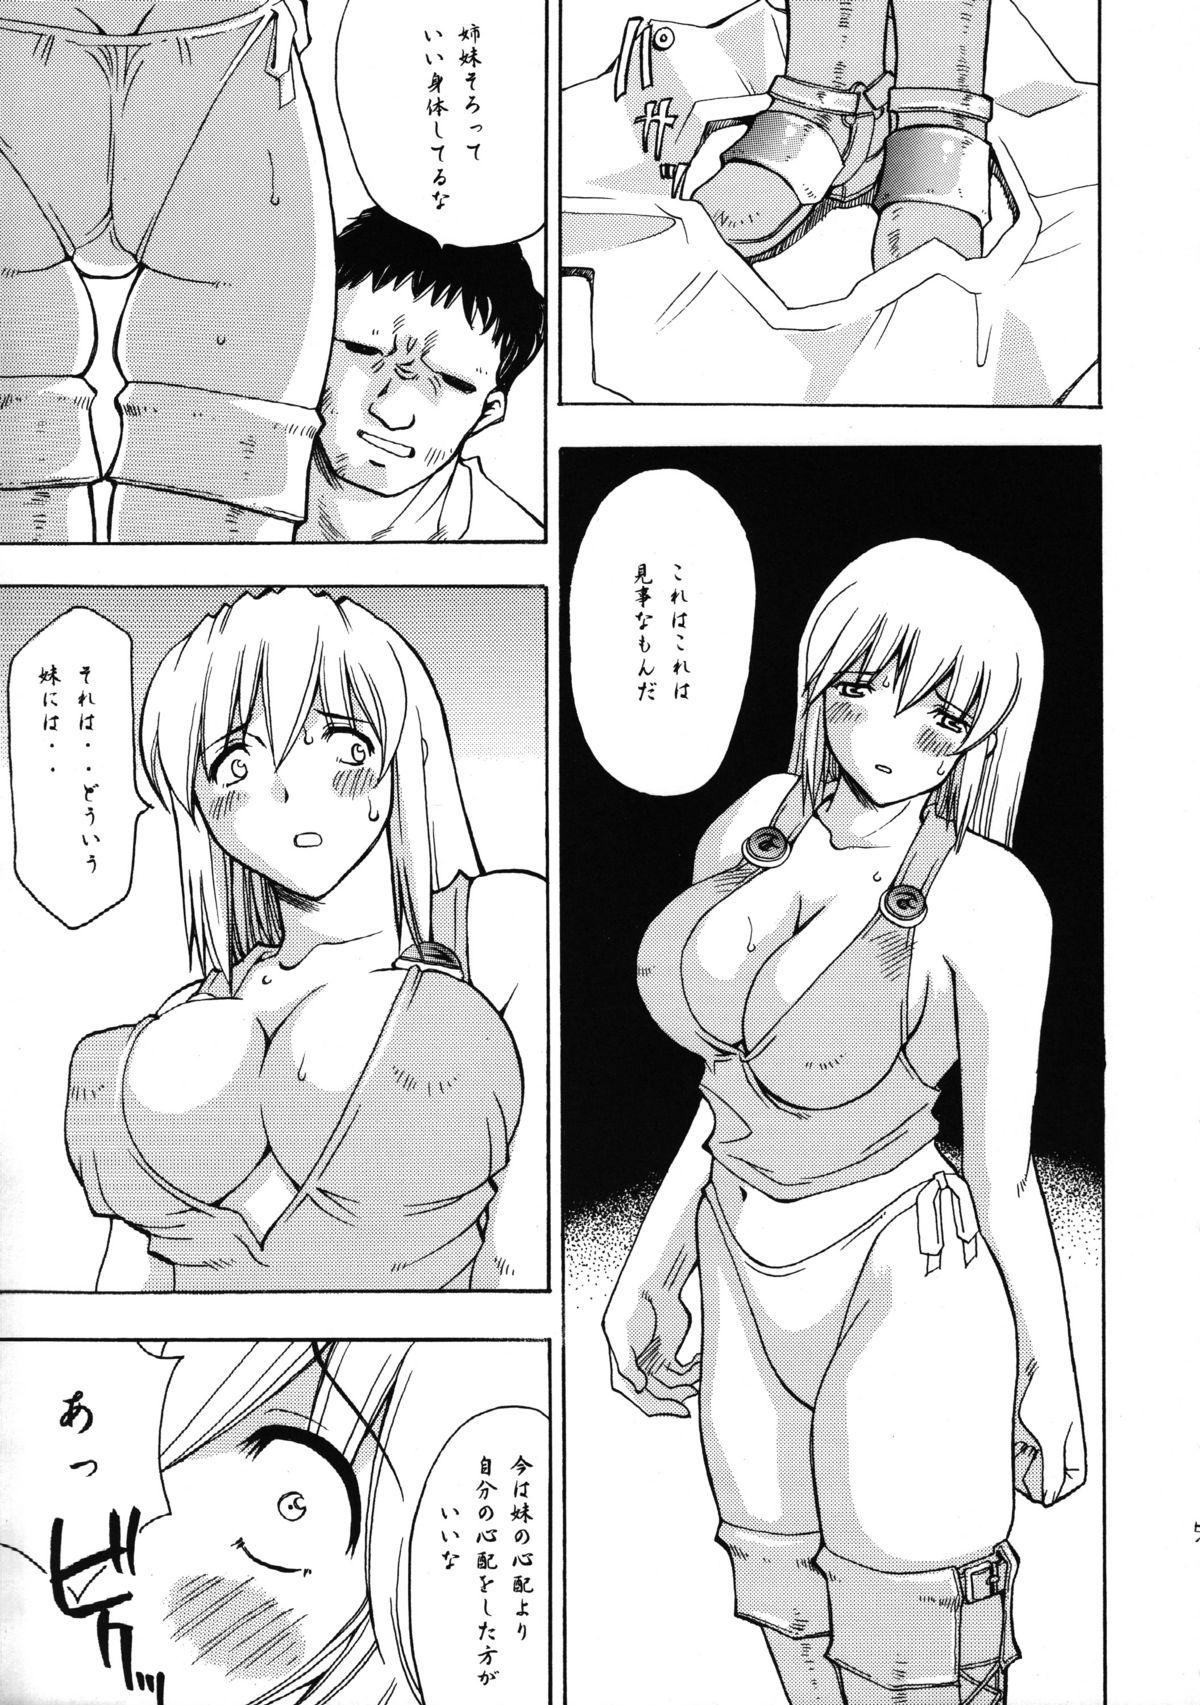 Shower EXUP 9 - Soulcalibur Hot Mom - Page 9